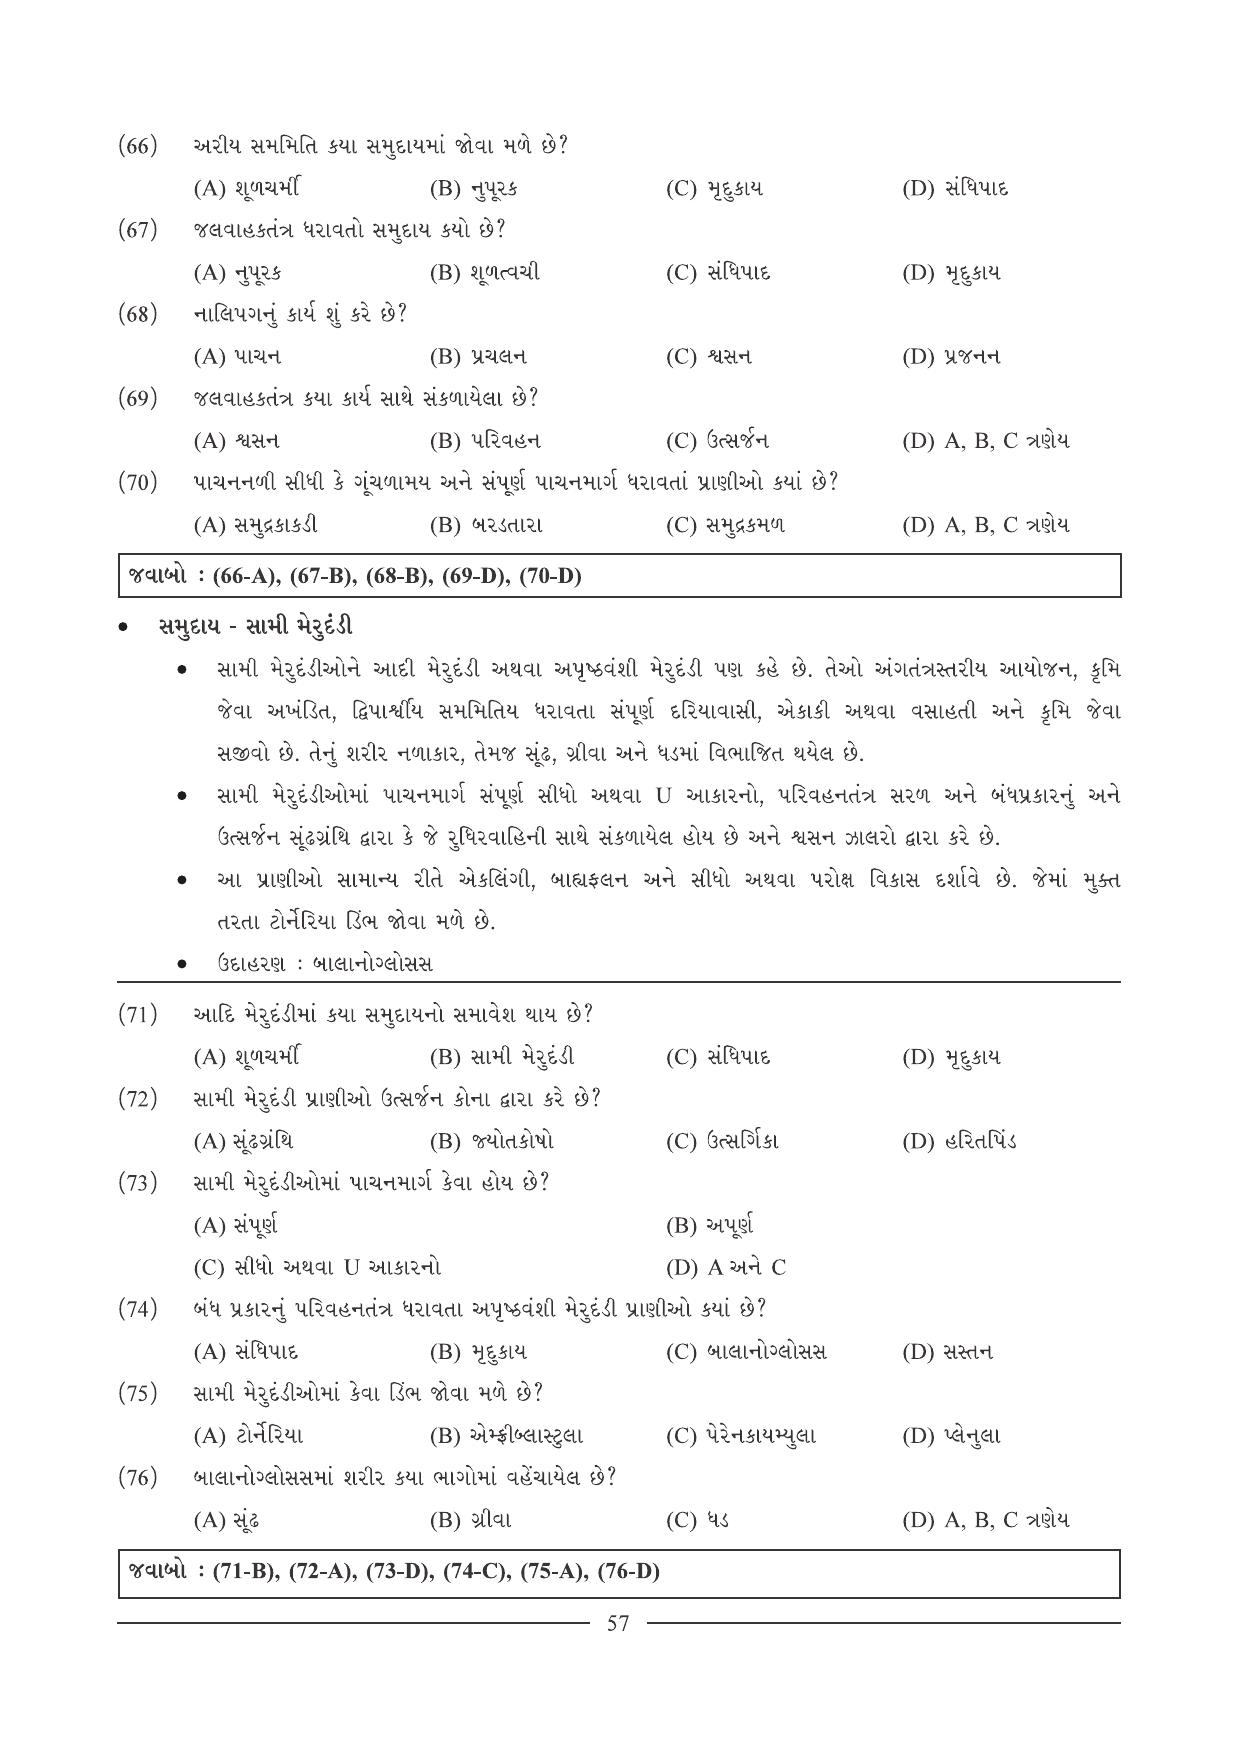 GSEB HSC Biology Question Paper (Gujarati Medium)- Chapter 4 - Page 10